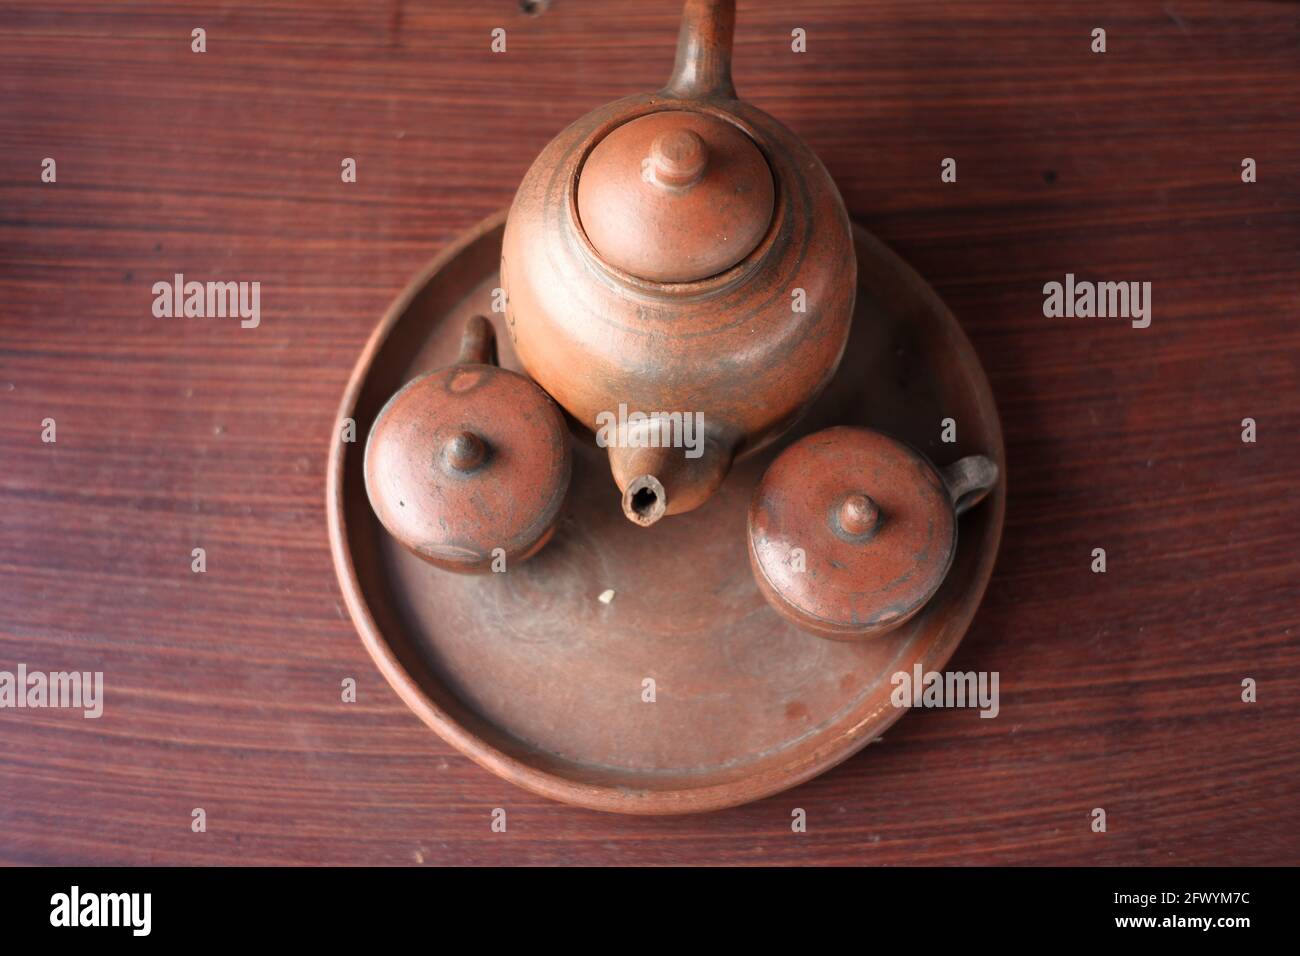 kettles and glasses handmade with clay materials. traditional Javanese kitchen tools used for warm drinks. Indonesian red kitchen utensil on a wooden Stock Photo